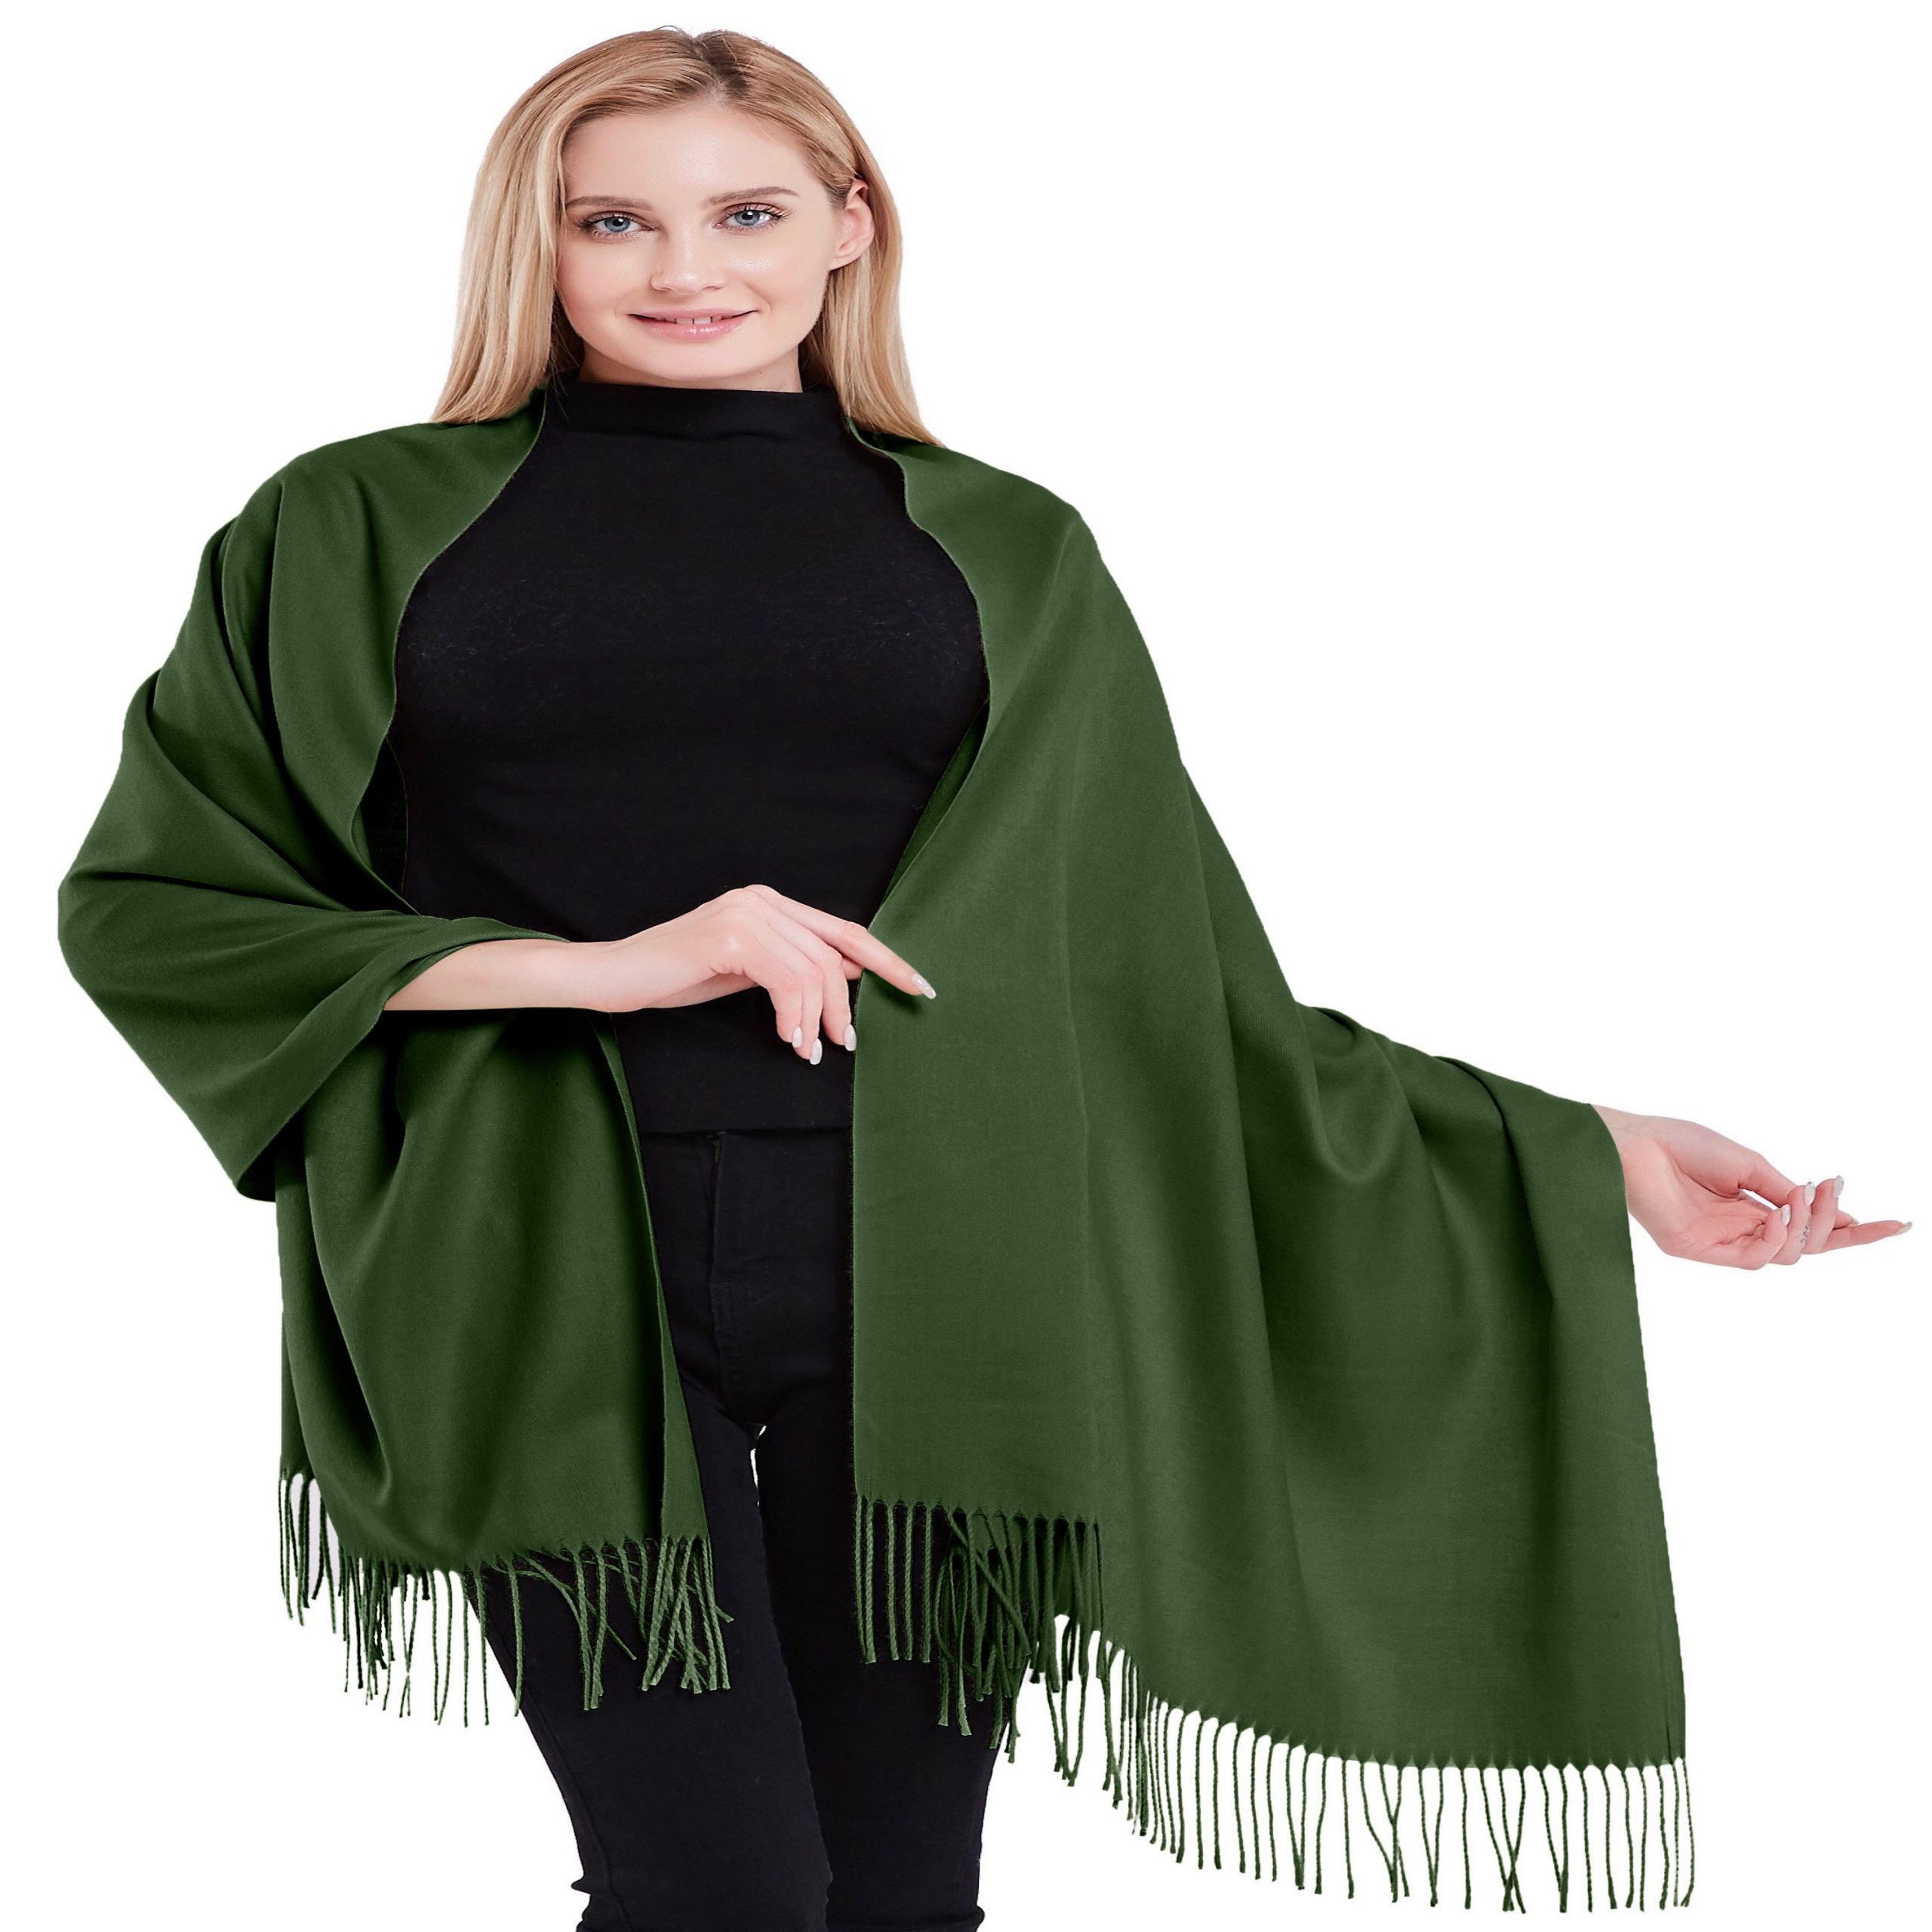 GREEN SCARF Handmade Pashmina Natural Pure Cashmere Stole Wrap Shawl Light Super Soft & Warm Unisex Scarf Nepal Ideal for Gift Fishtail